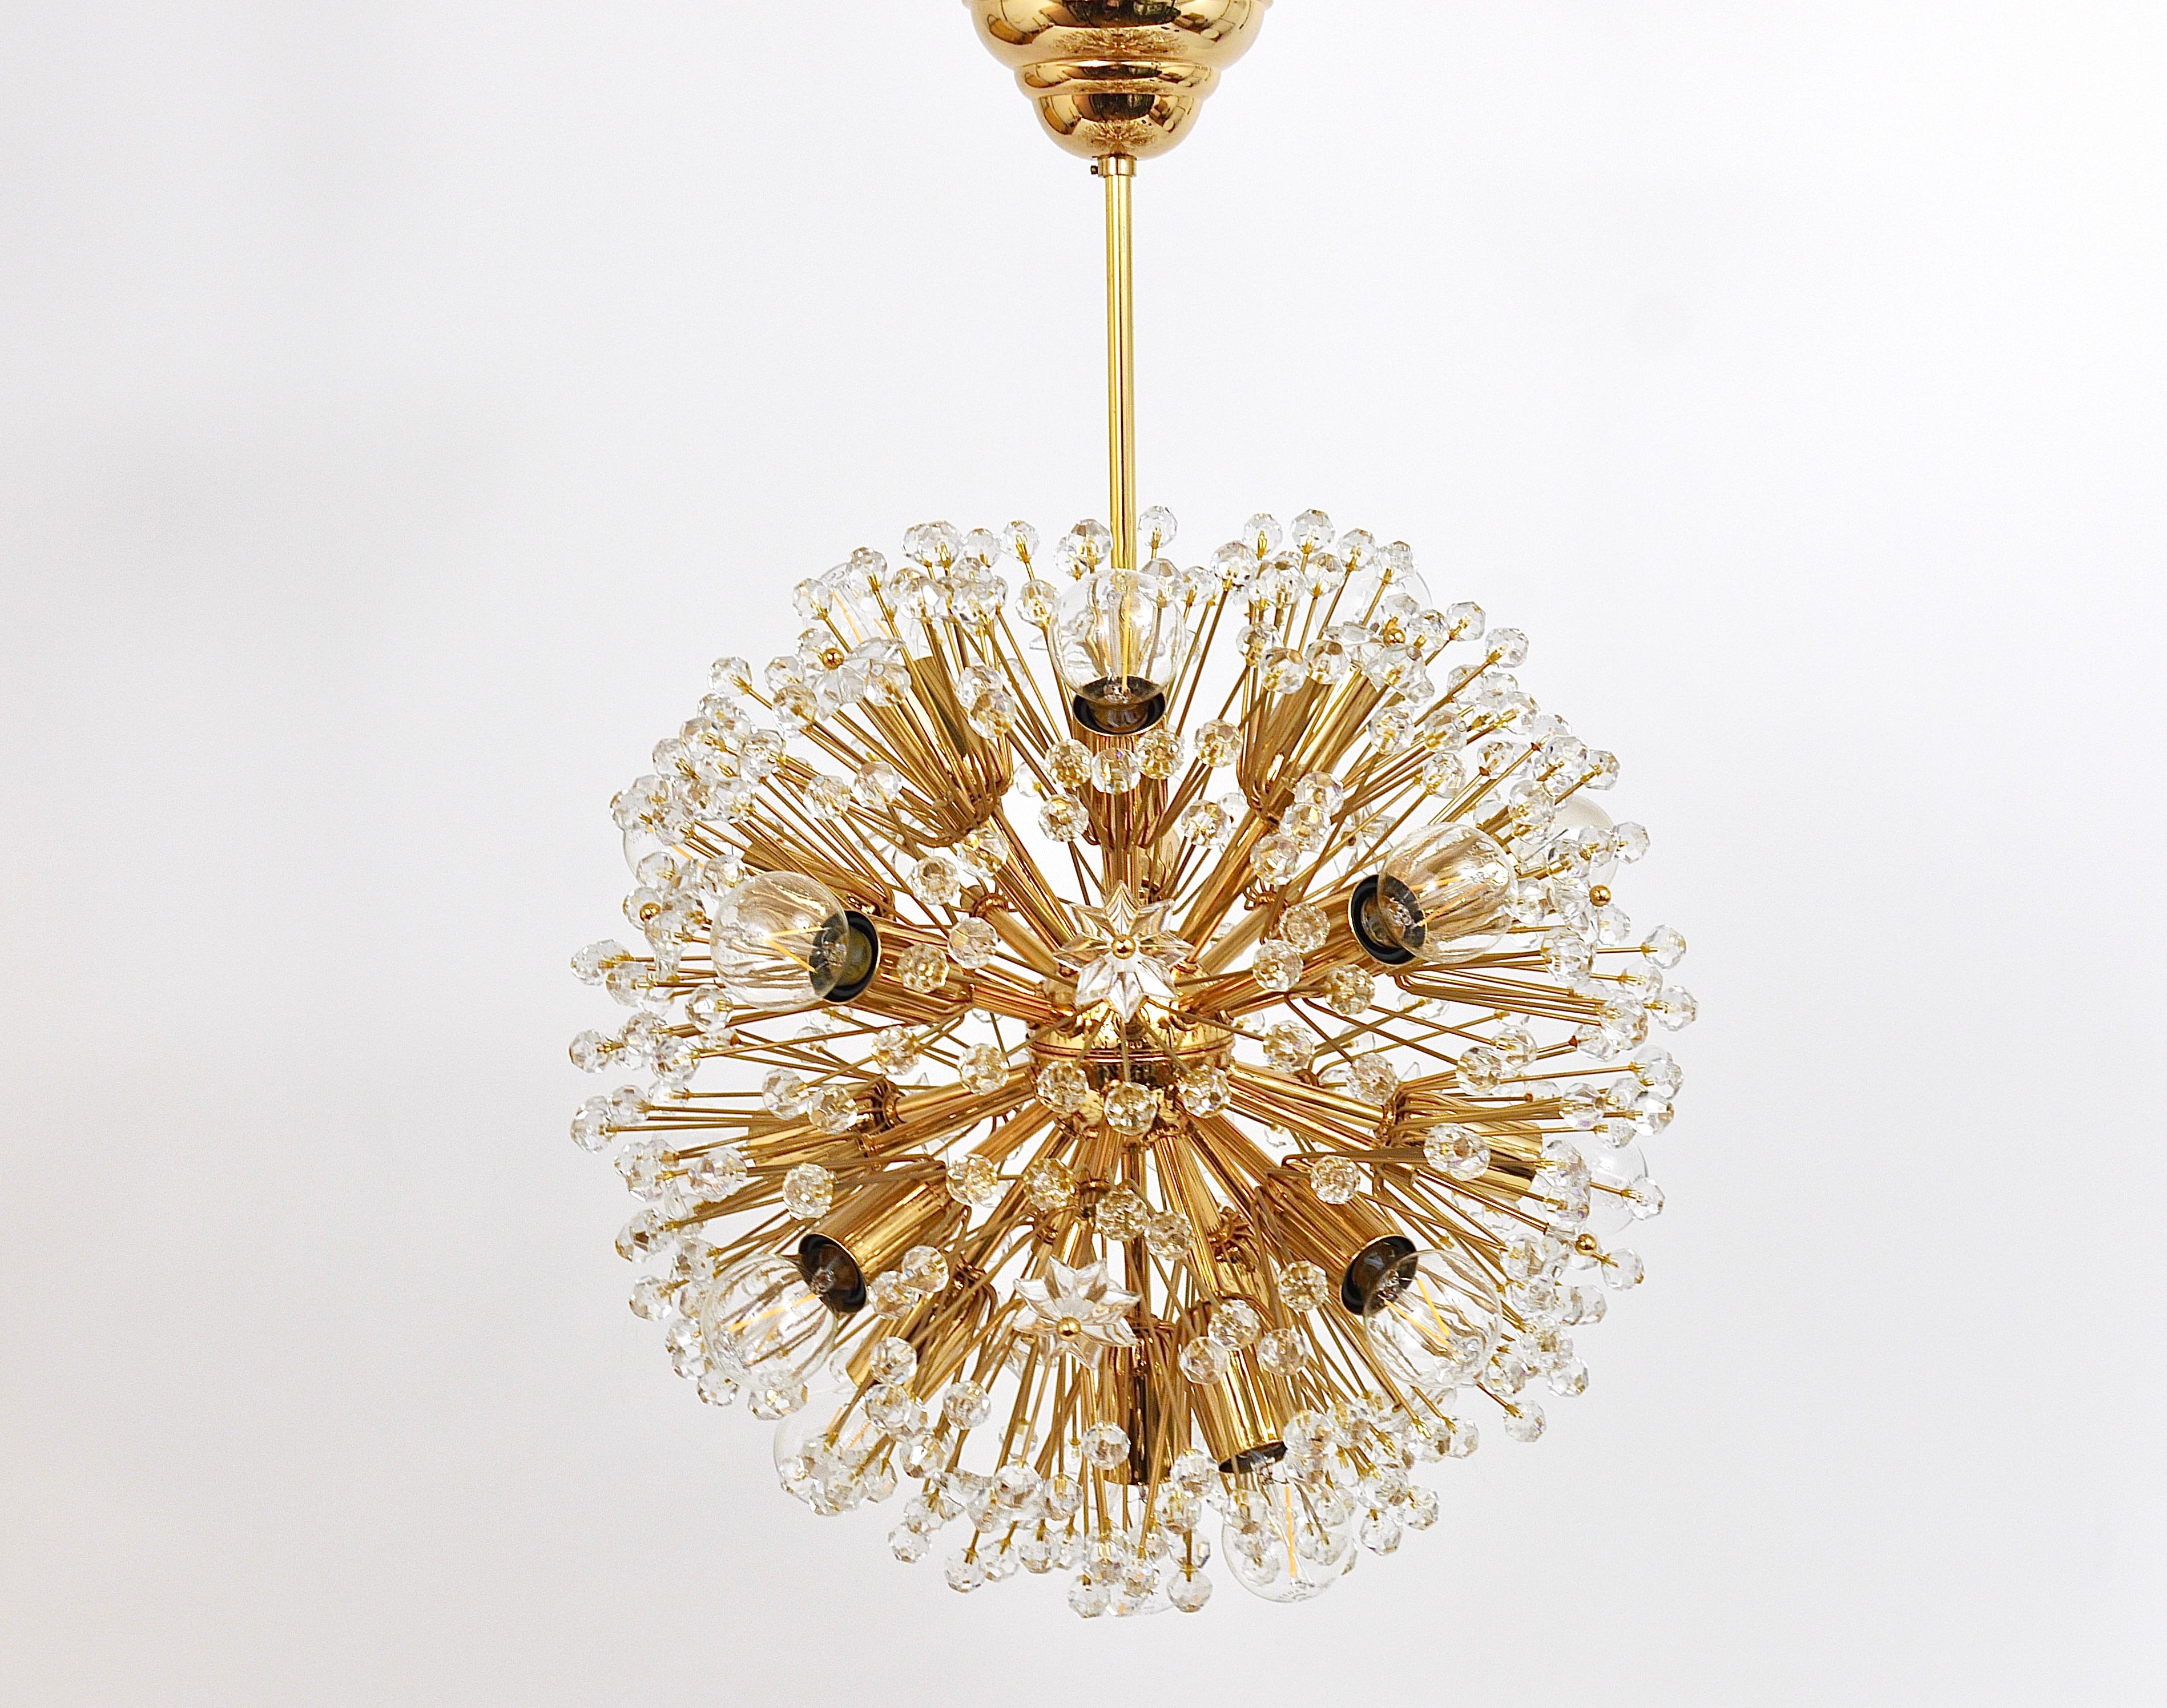 Beautiful golden snowflake blowball sputnik chandelier. Exclusive 24 carat gold-plated model, made in Vienna / Austria in the 1970s, in the manner of Emil Stejnar / Rupert Nikoll. This chandelier has a diameter of 15 in, its total height incl. rod